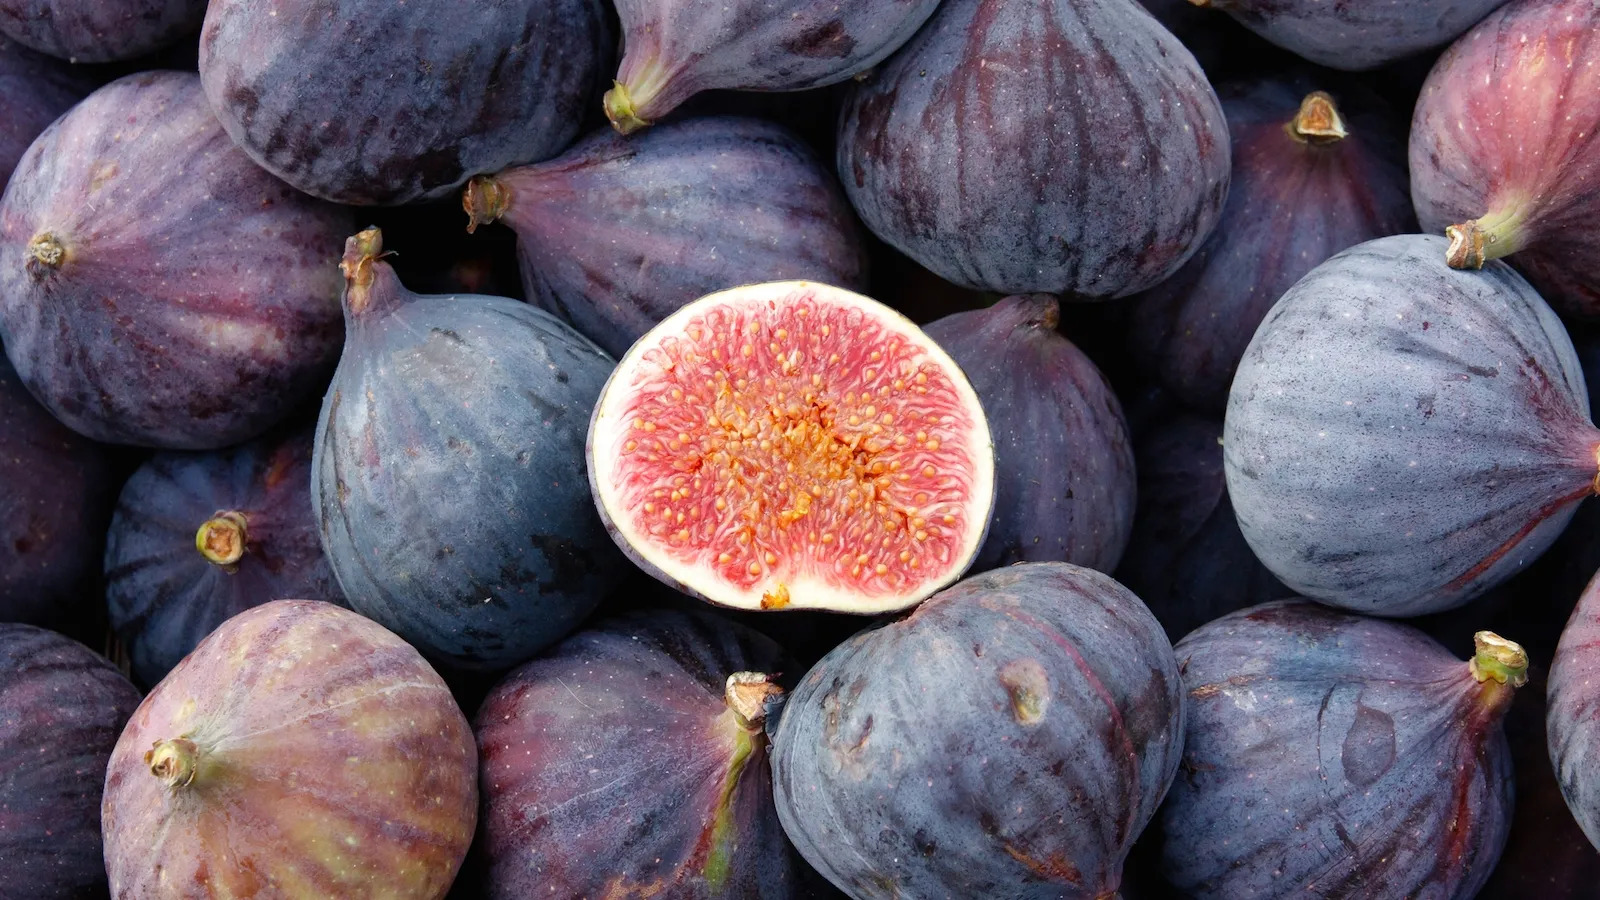 The Friday Fig: A Leafy Companion Bringing Joy and Health Into Homes